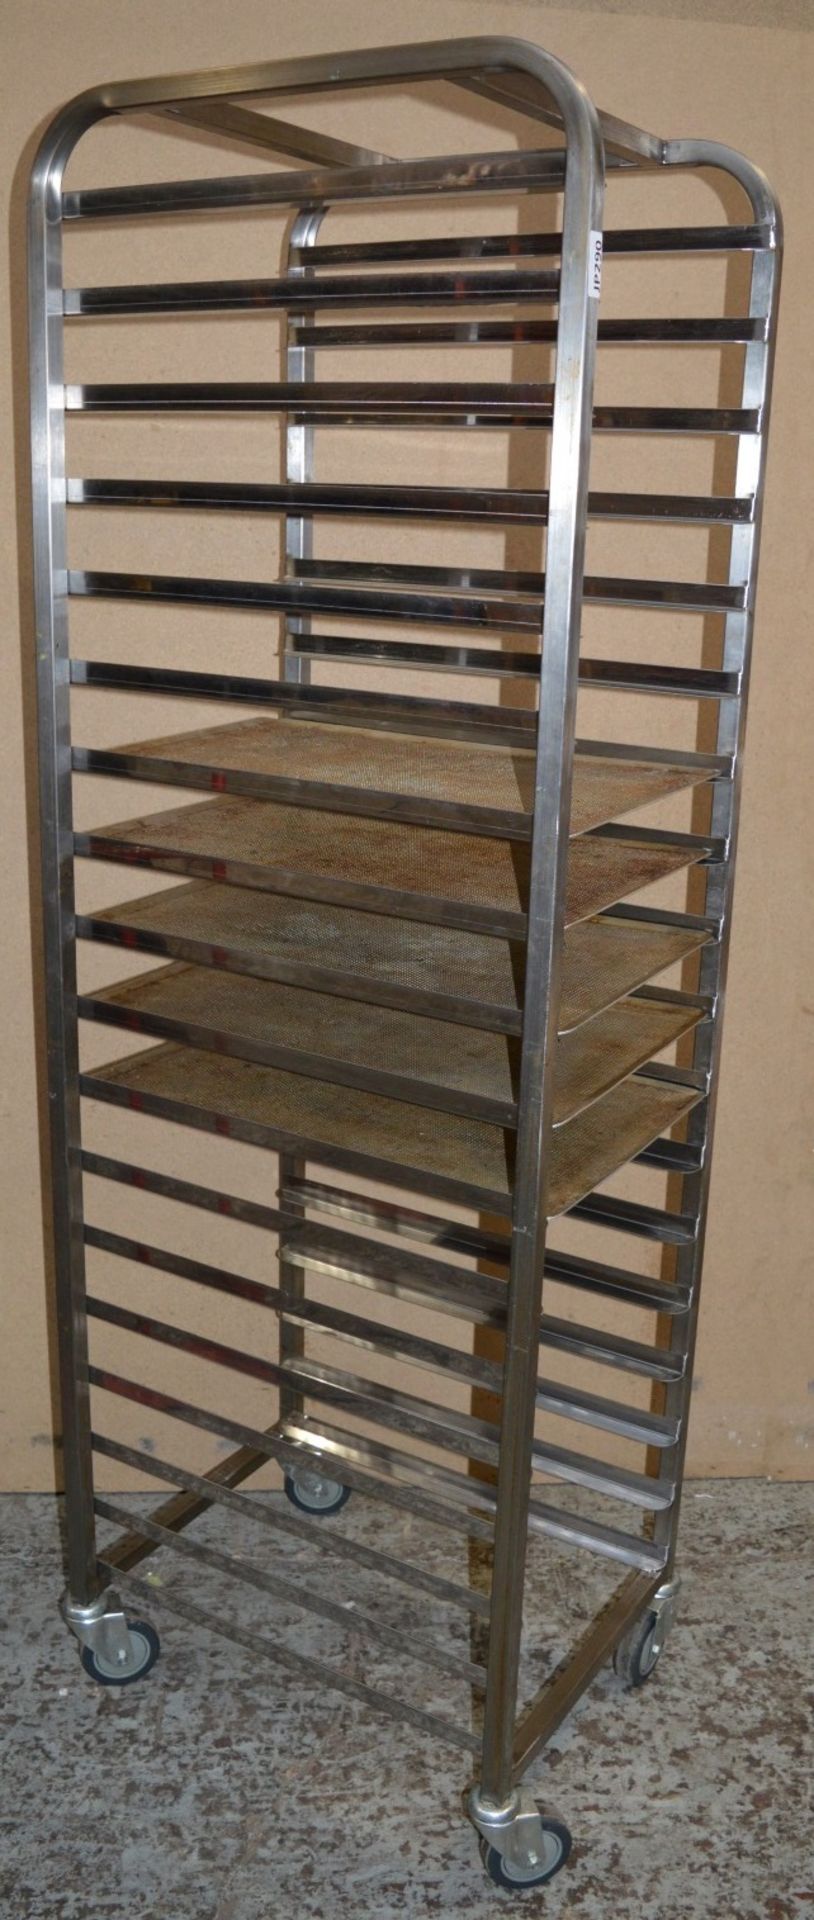 1 x Stainless Steel 18 Tier Pan and Tray Rack With Five Perforated Cooking Trays - CL282 - H183 x